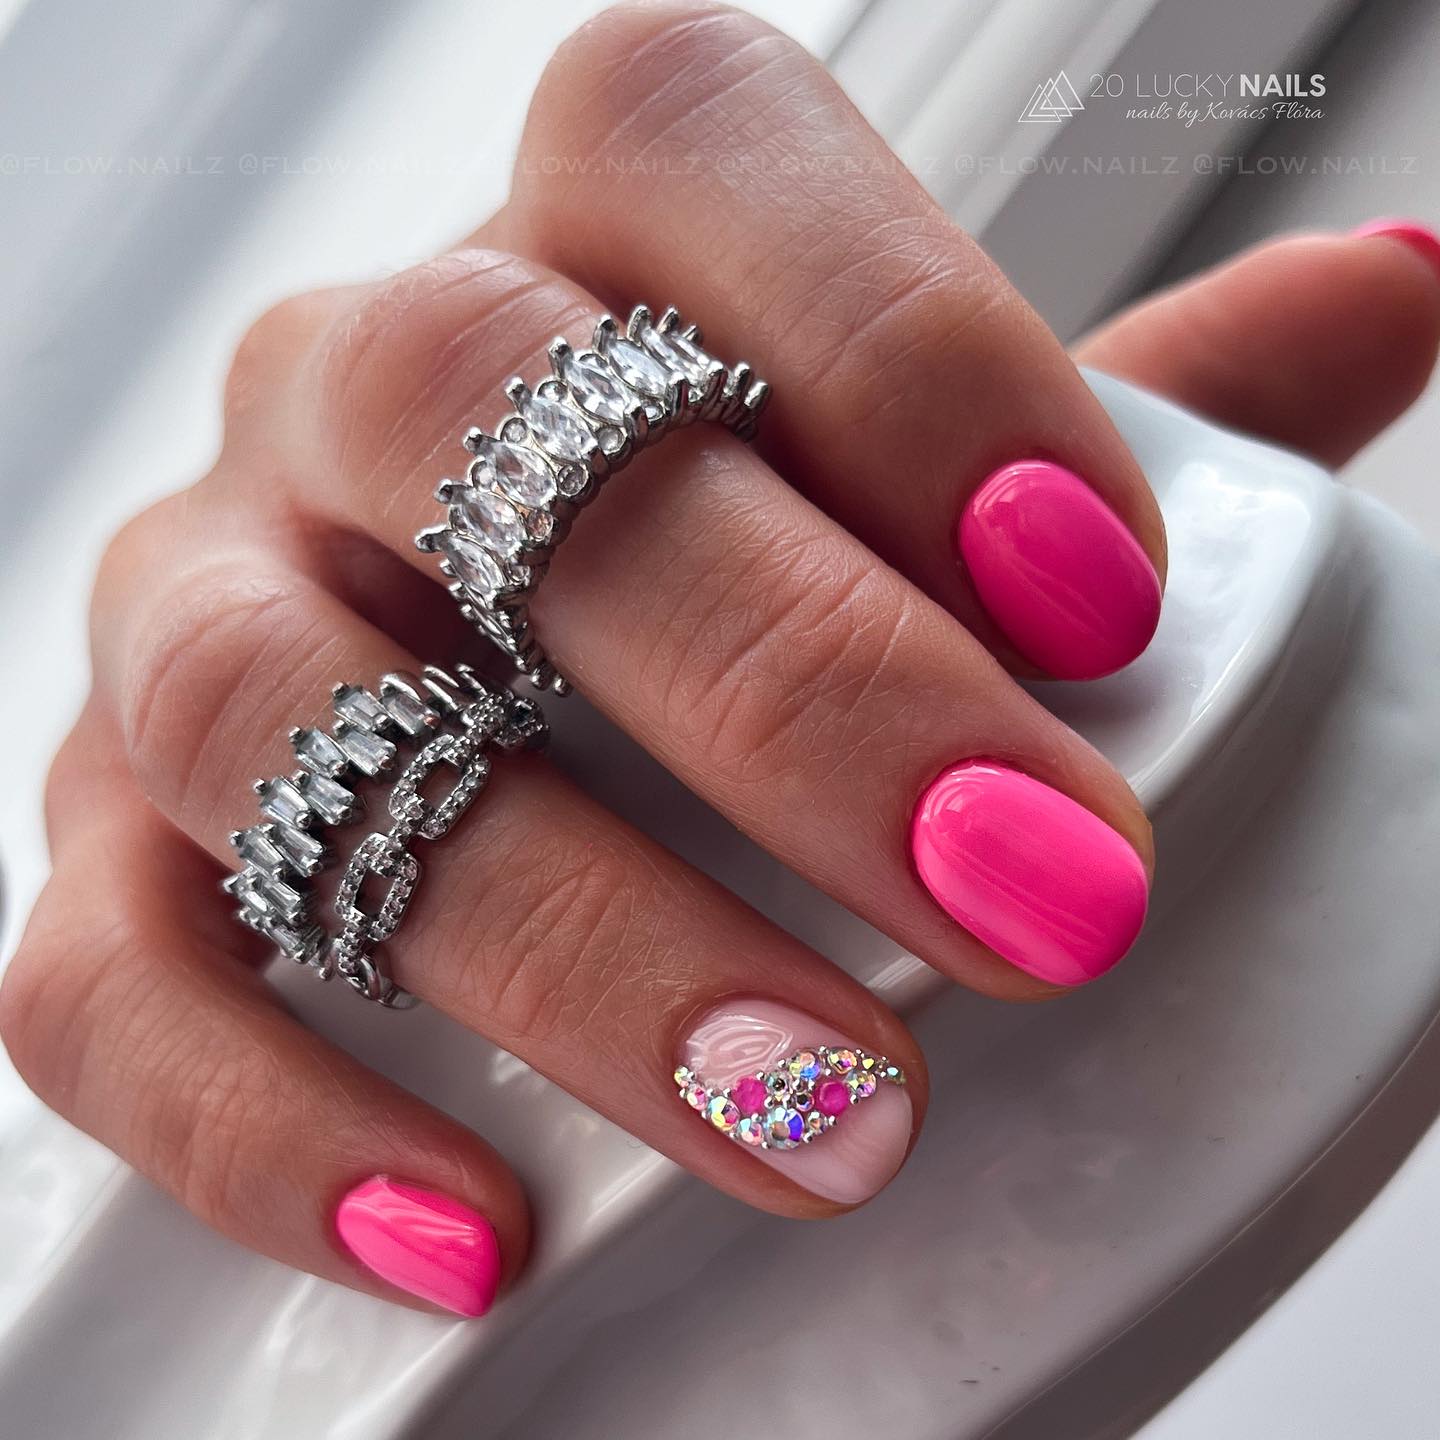 Short Pink Nails with Rhinestones on Accent Nail